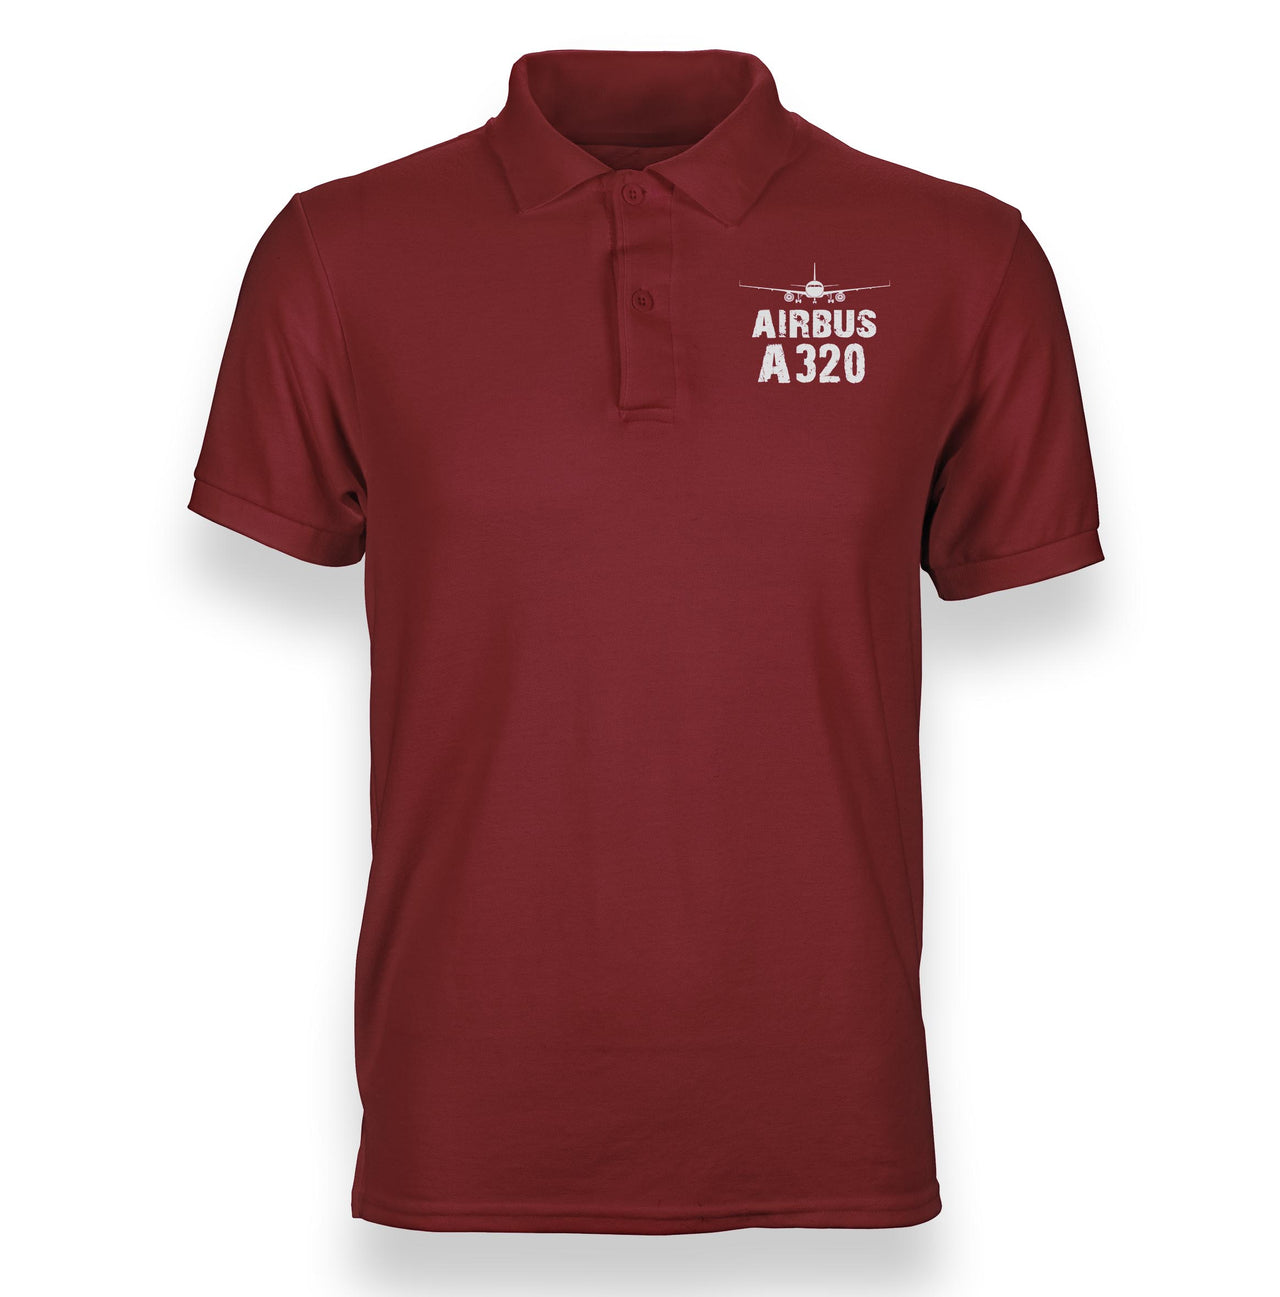 Airbus A320 & Plane Designed Polo T-Shirts